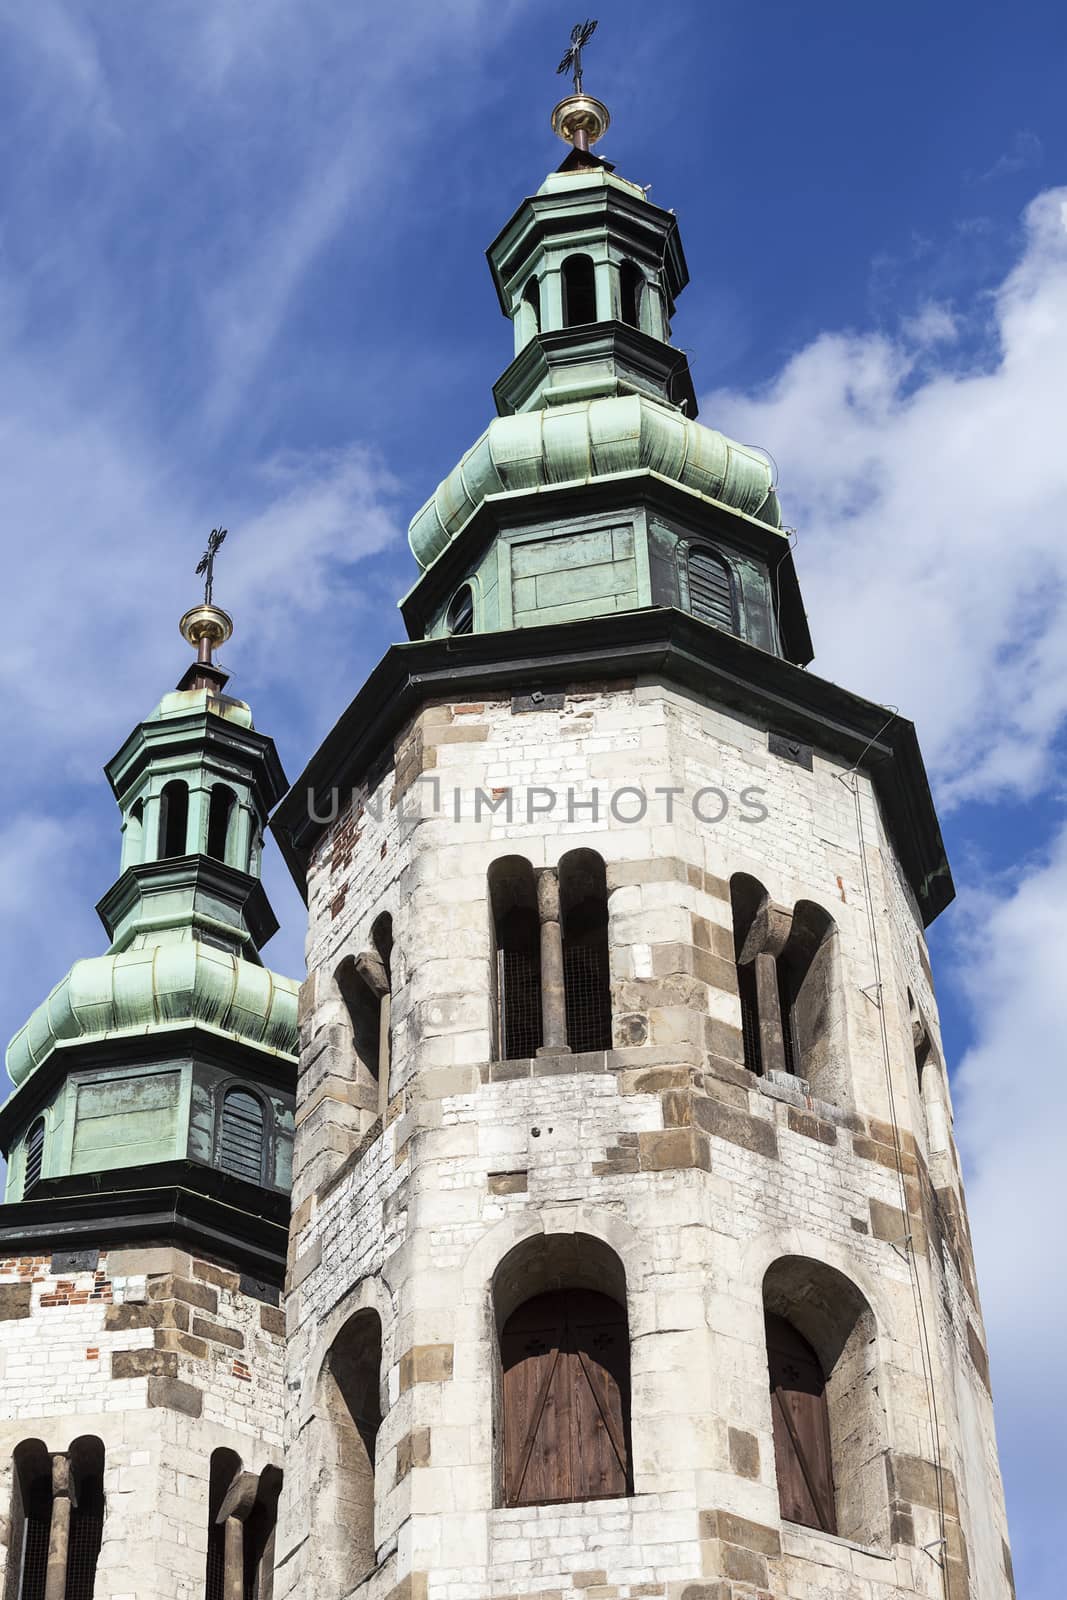 11th century Church of St. Andrew in Old Town, Krakow, Poland by mychadre77